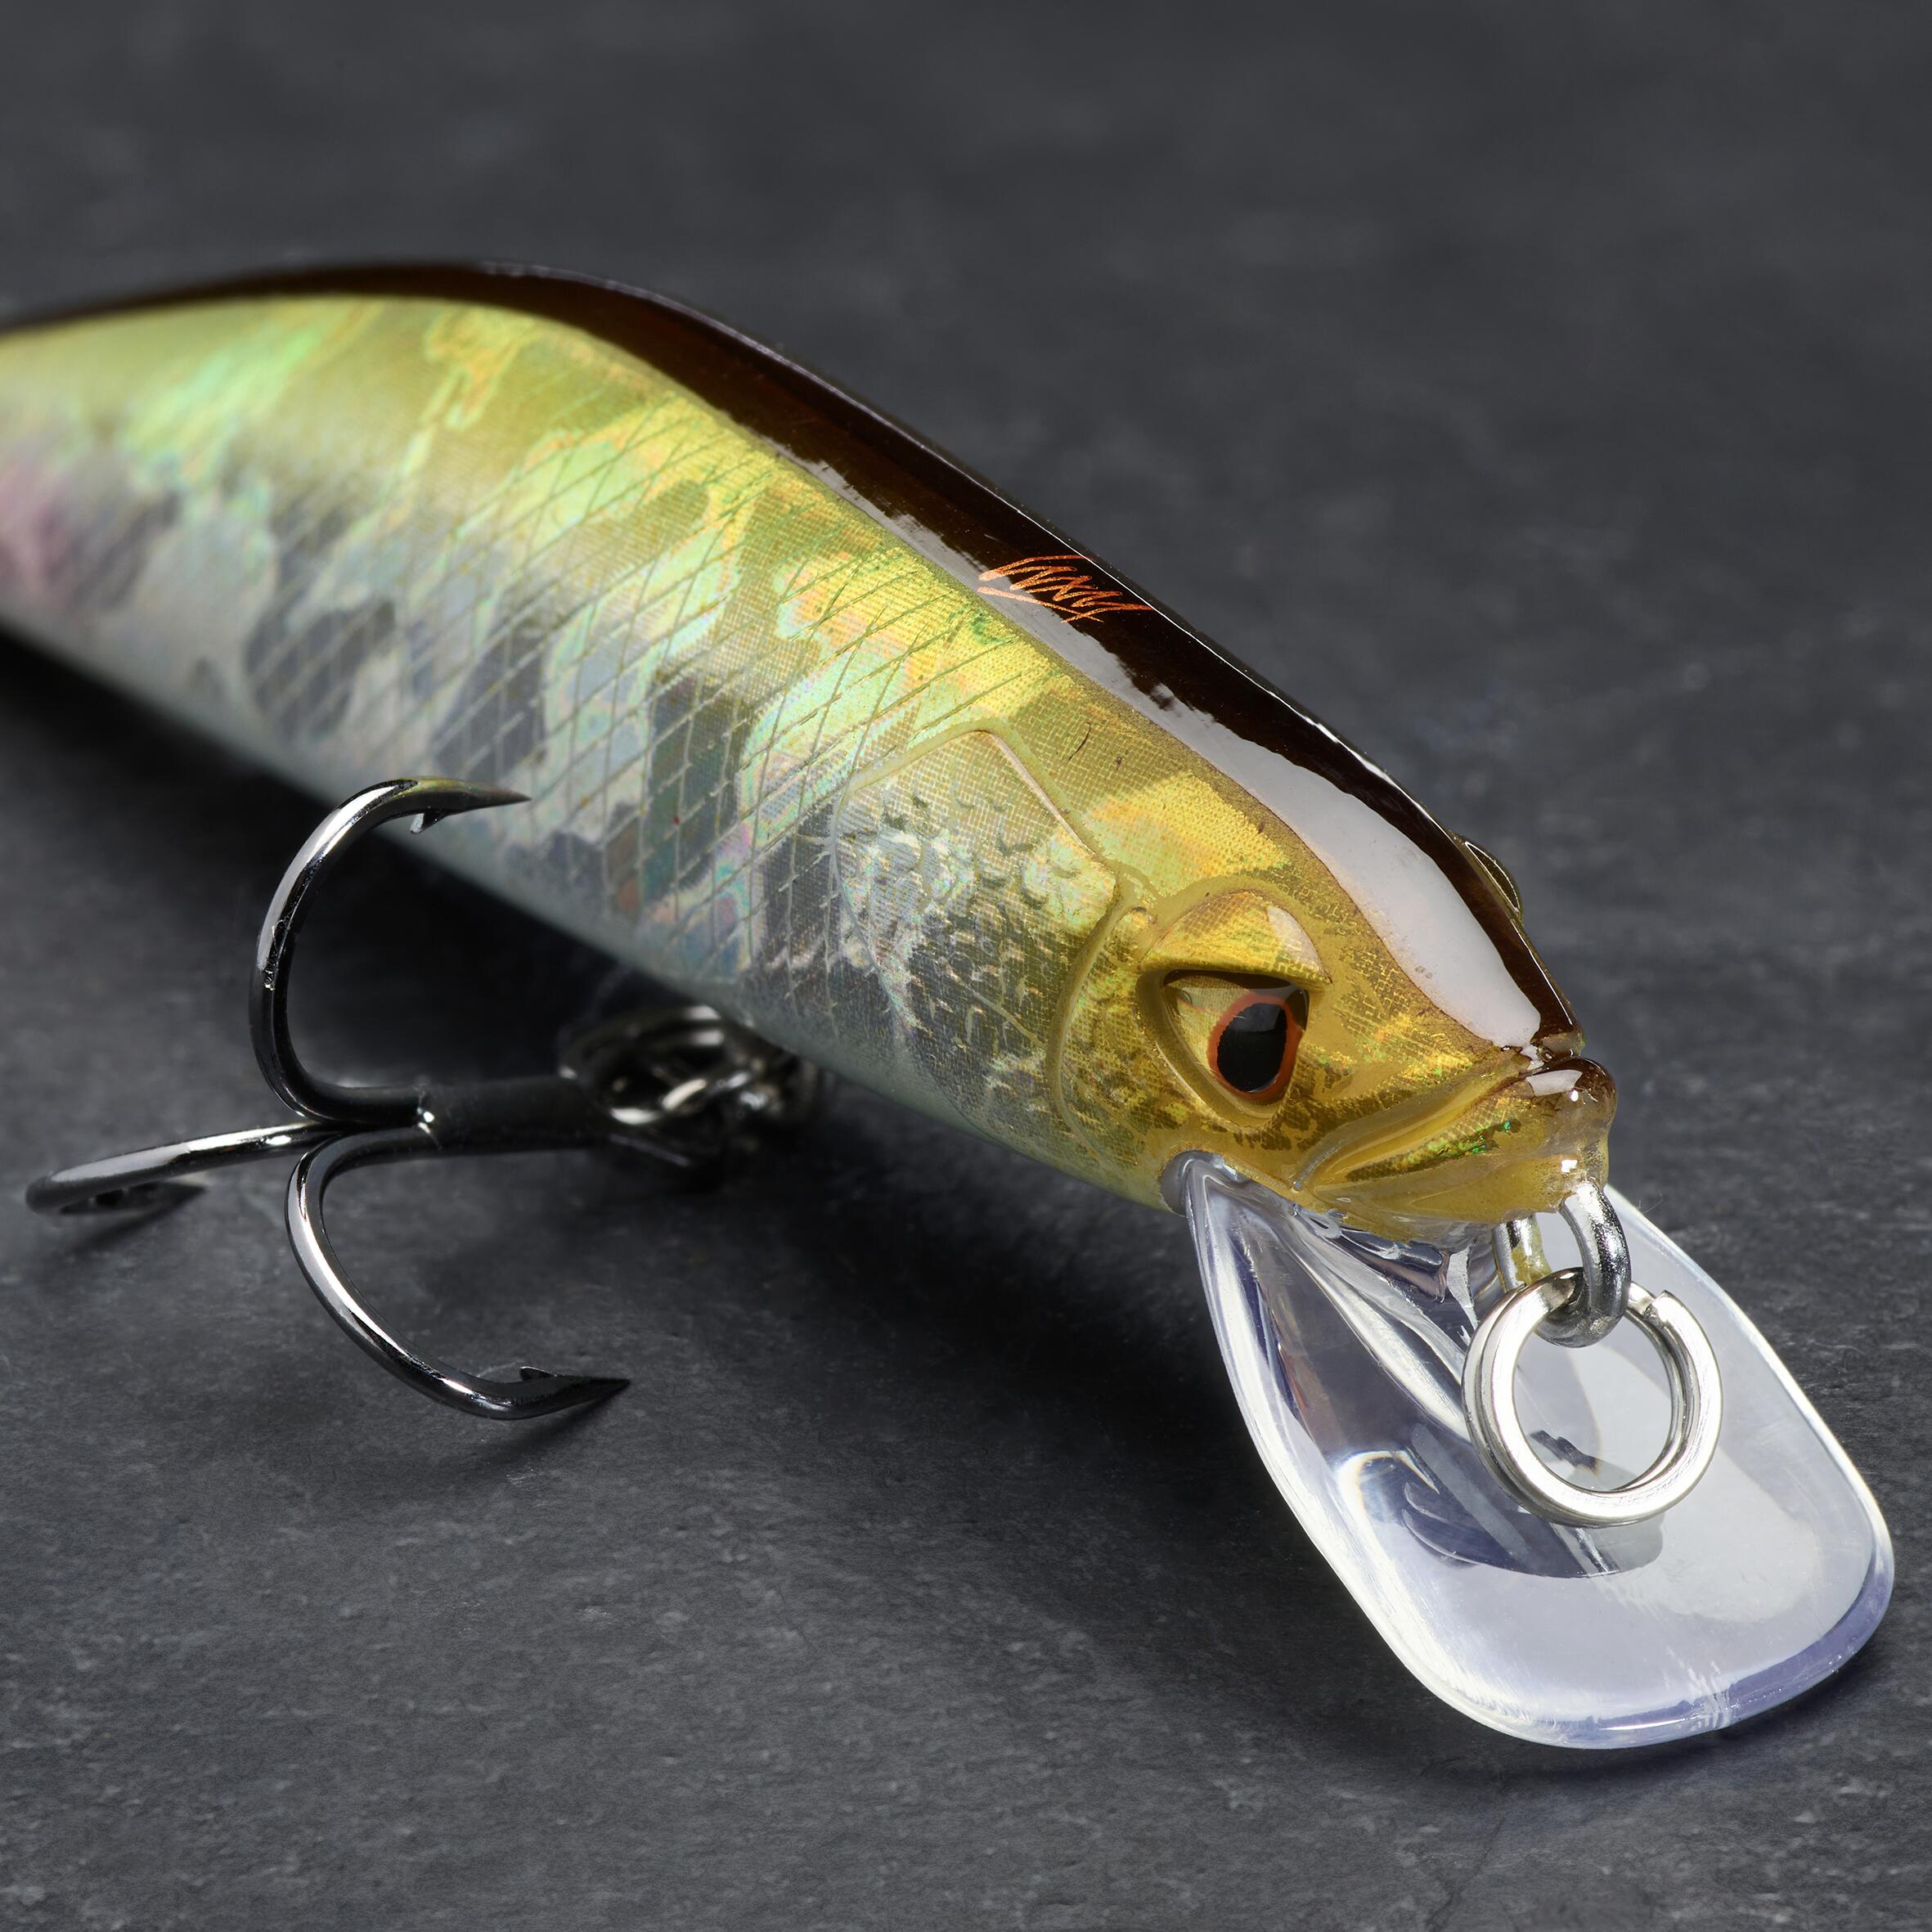 MINNOW HARD LURE FOR TROUT WXM MNWFS 70 US - GREEN BACK 2/4